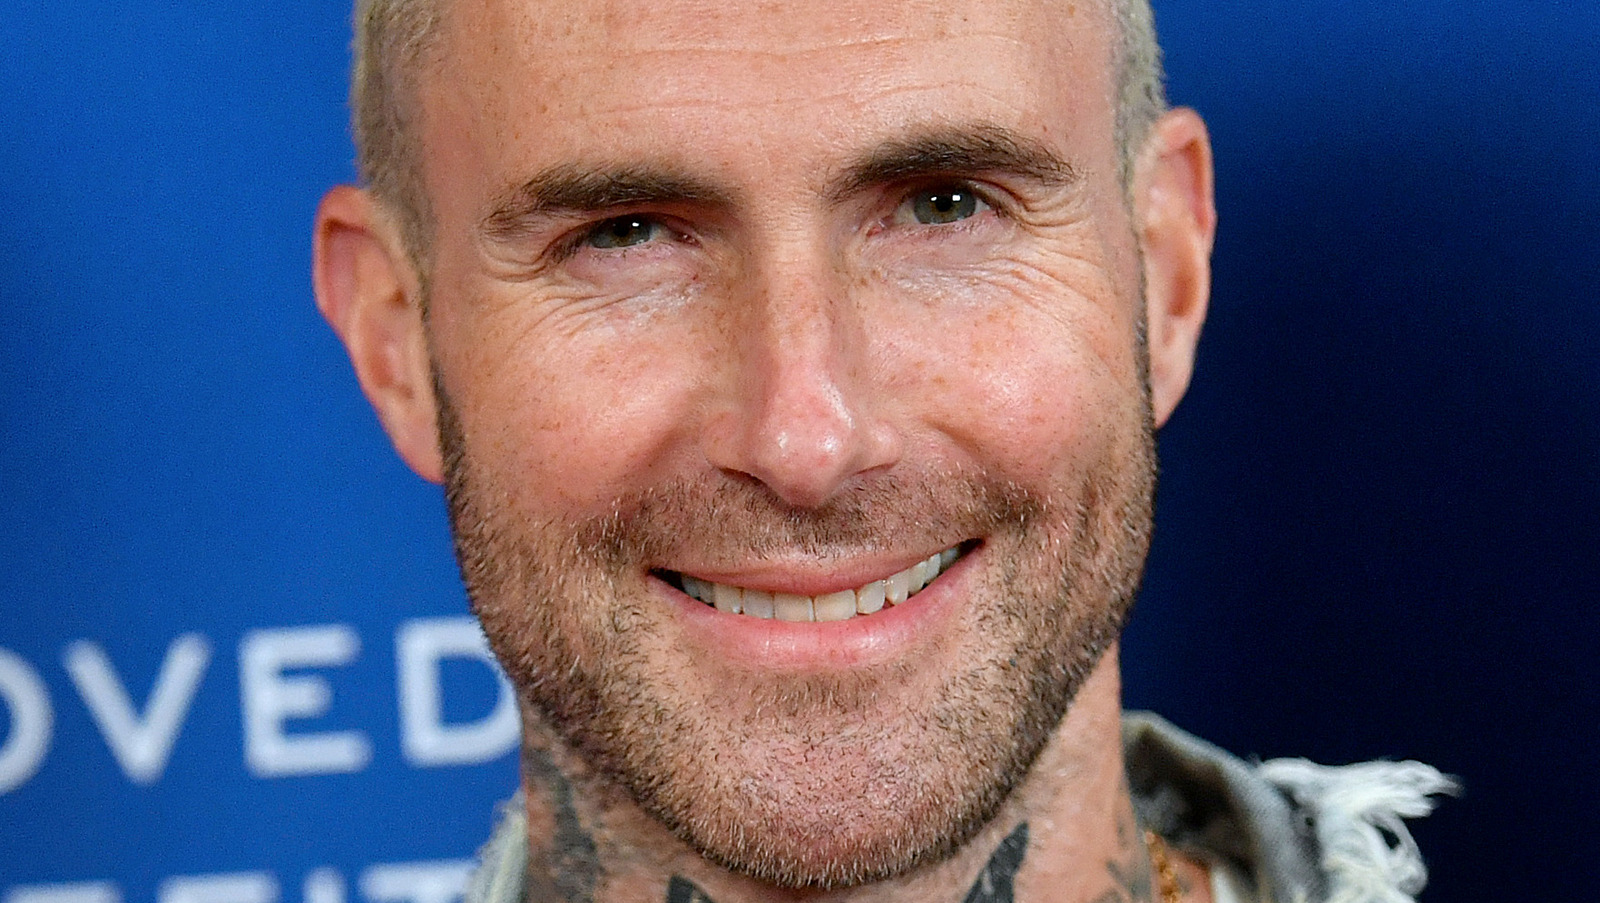 Adam Levine's Blue Hair Is the Latest in a Long Line of Bold Celebrity Hair Changes - wide 9